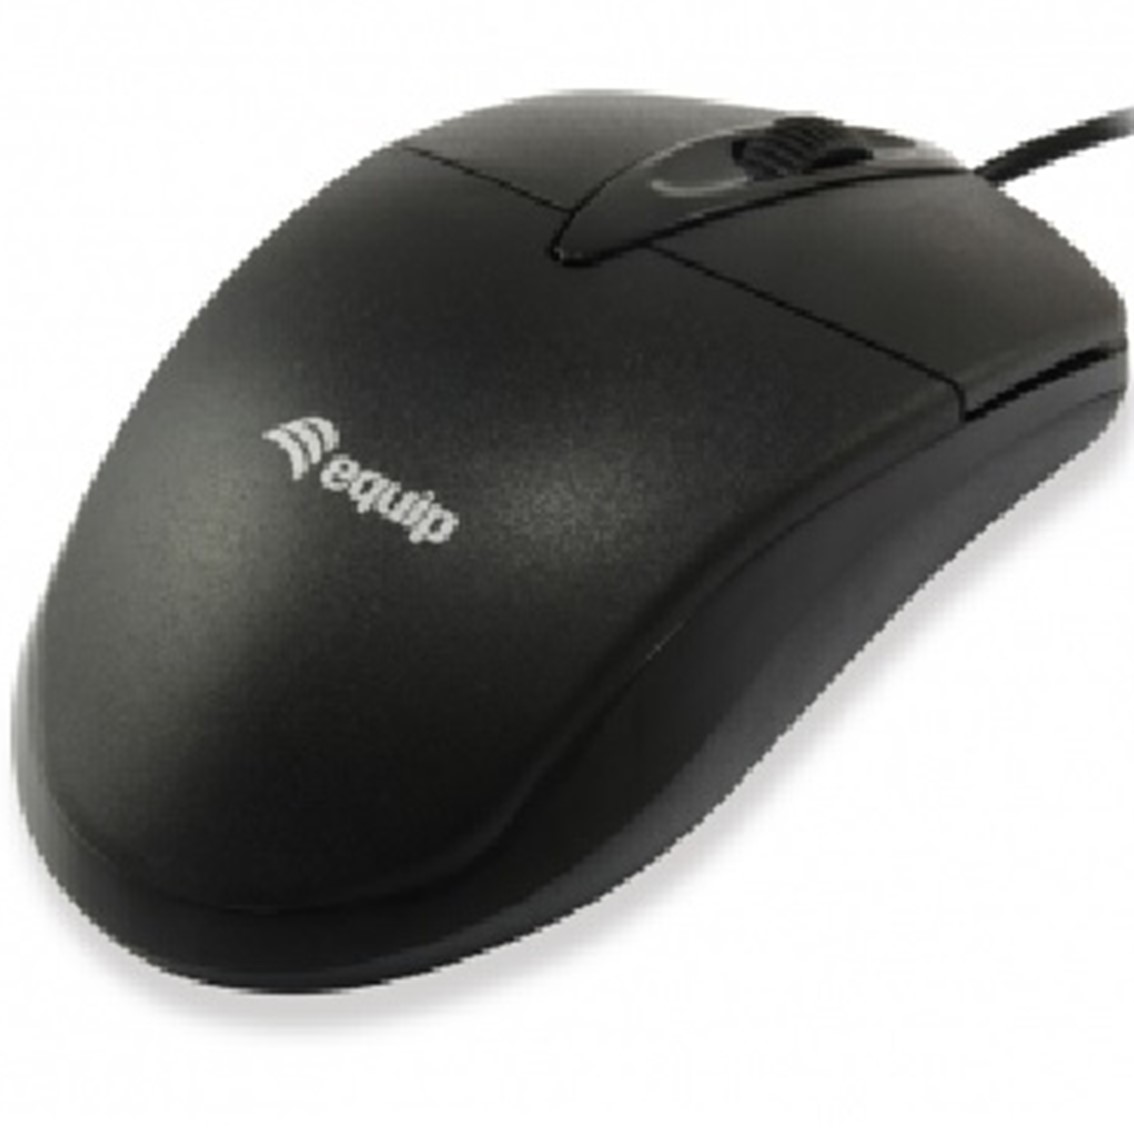 Mouse raton equip life 2...